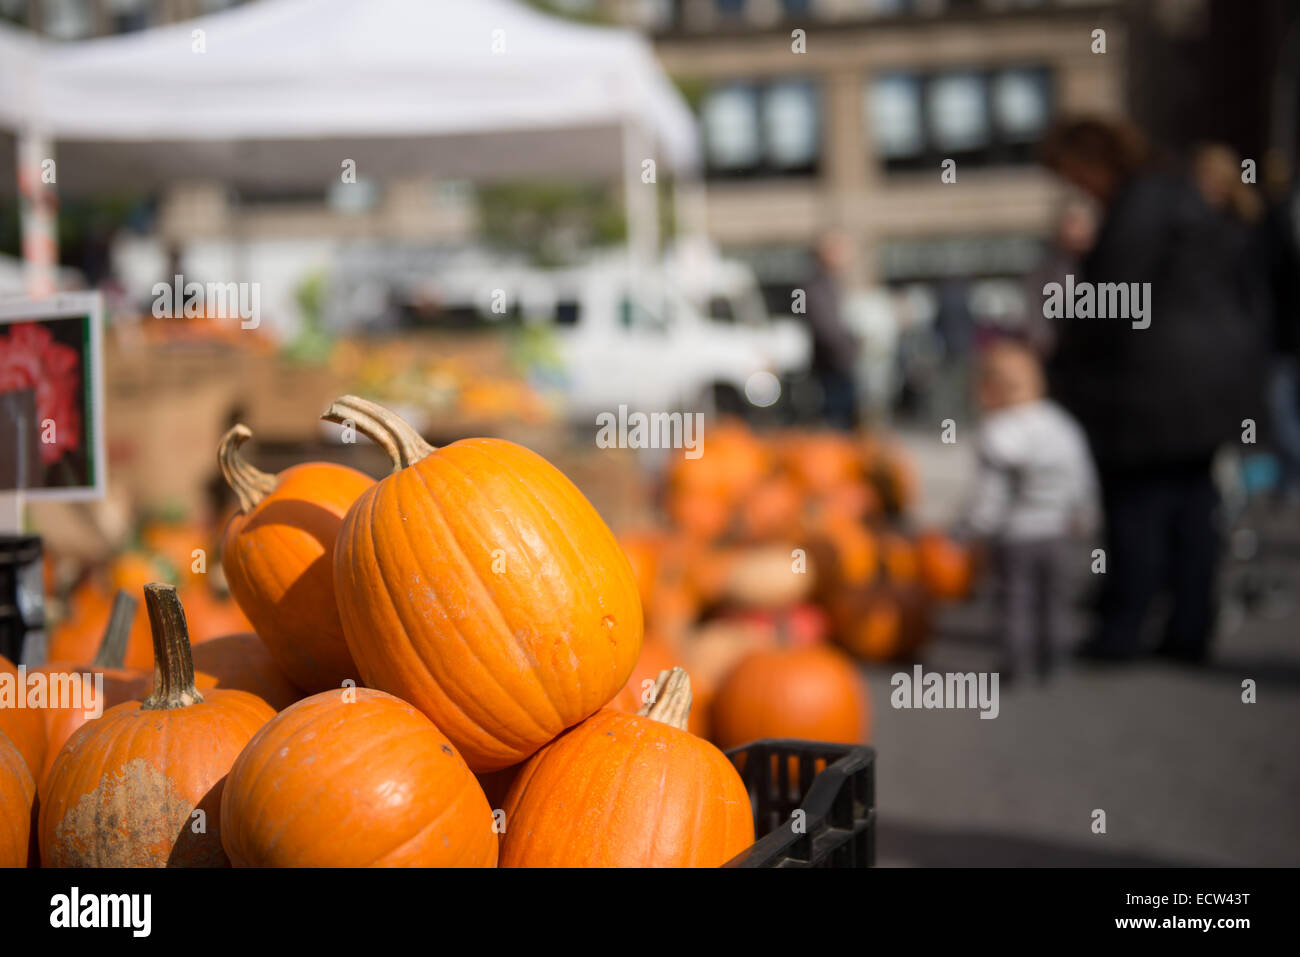 Pumpkins for sale, some days before Halloween celebration, in a street market at Union Square, Manhattan, New York City, NY, USA Stock Photo